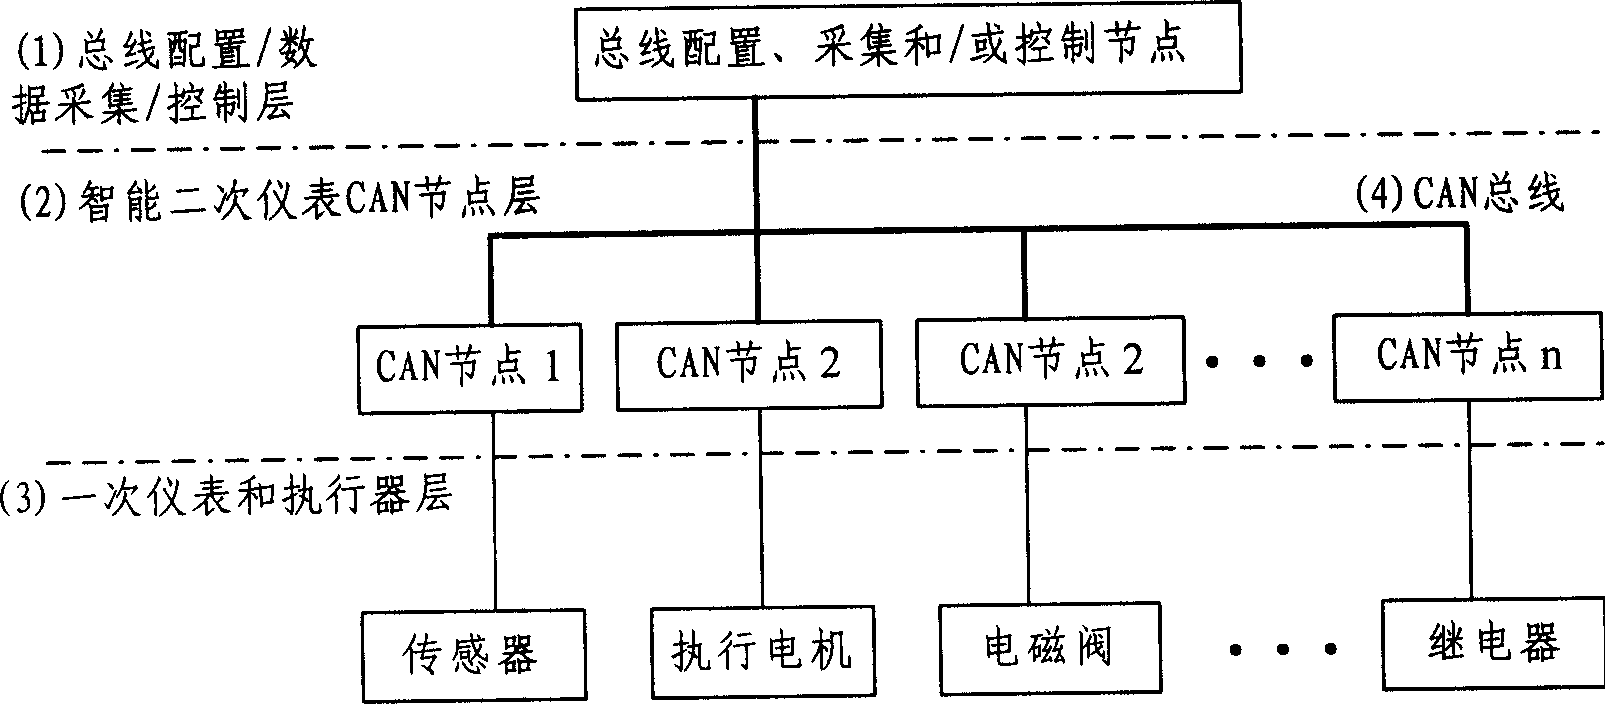 Data acquisition control system based on CAN bus